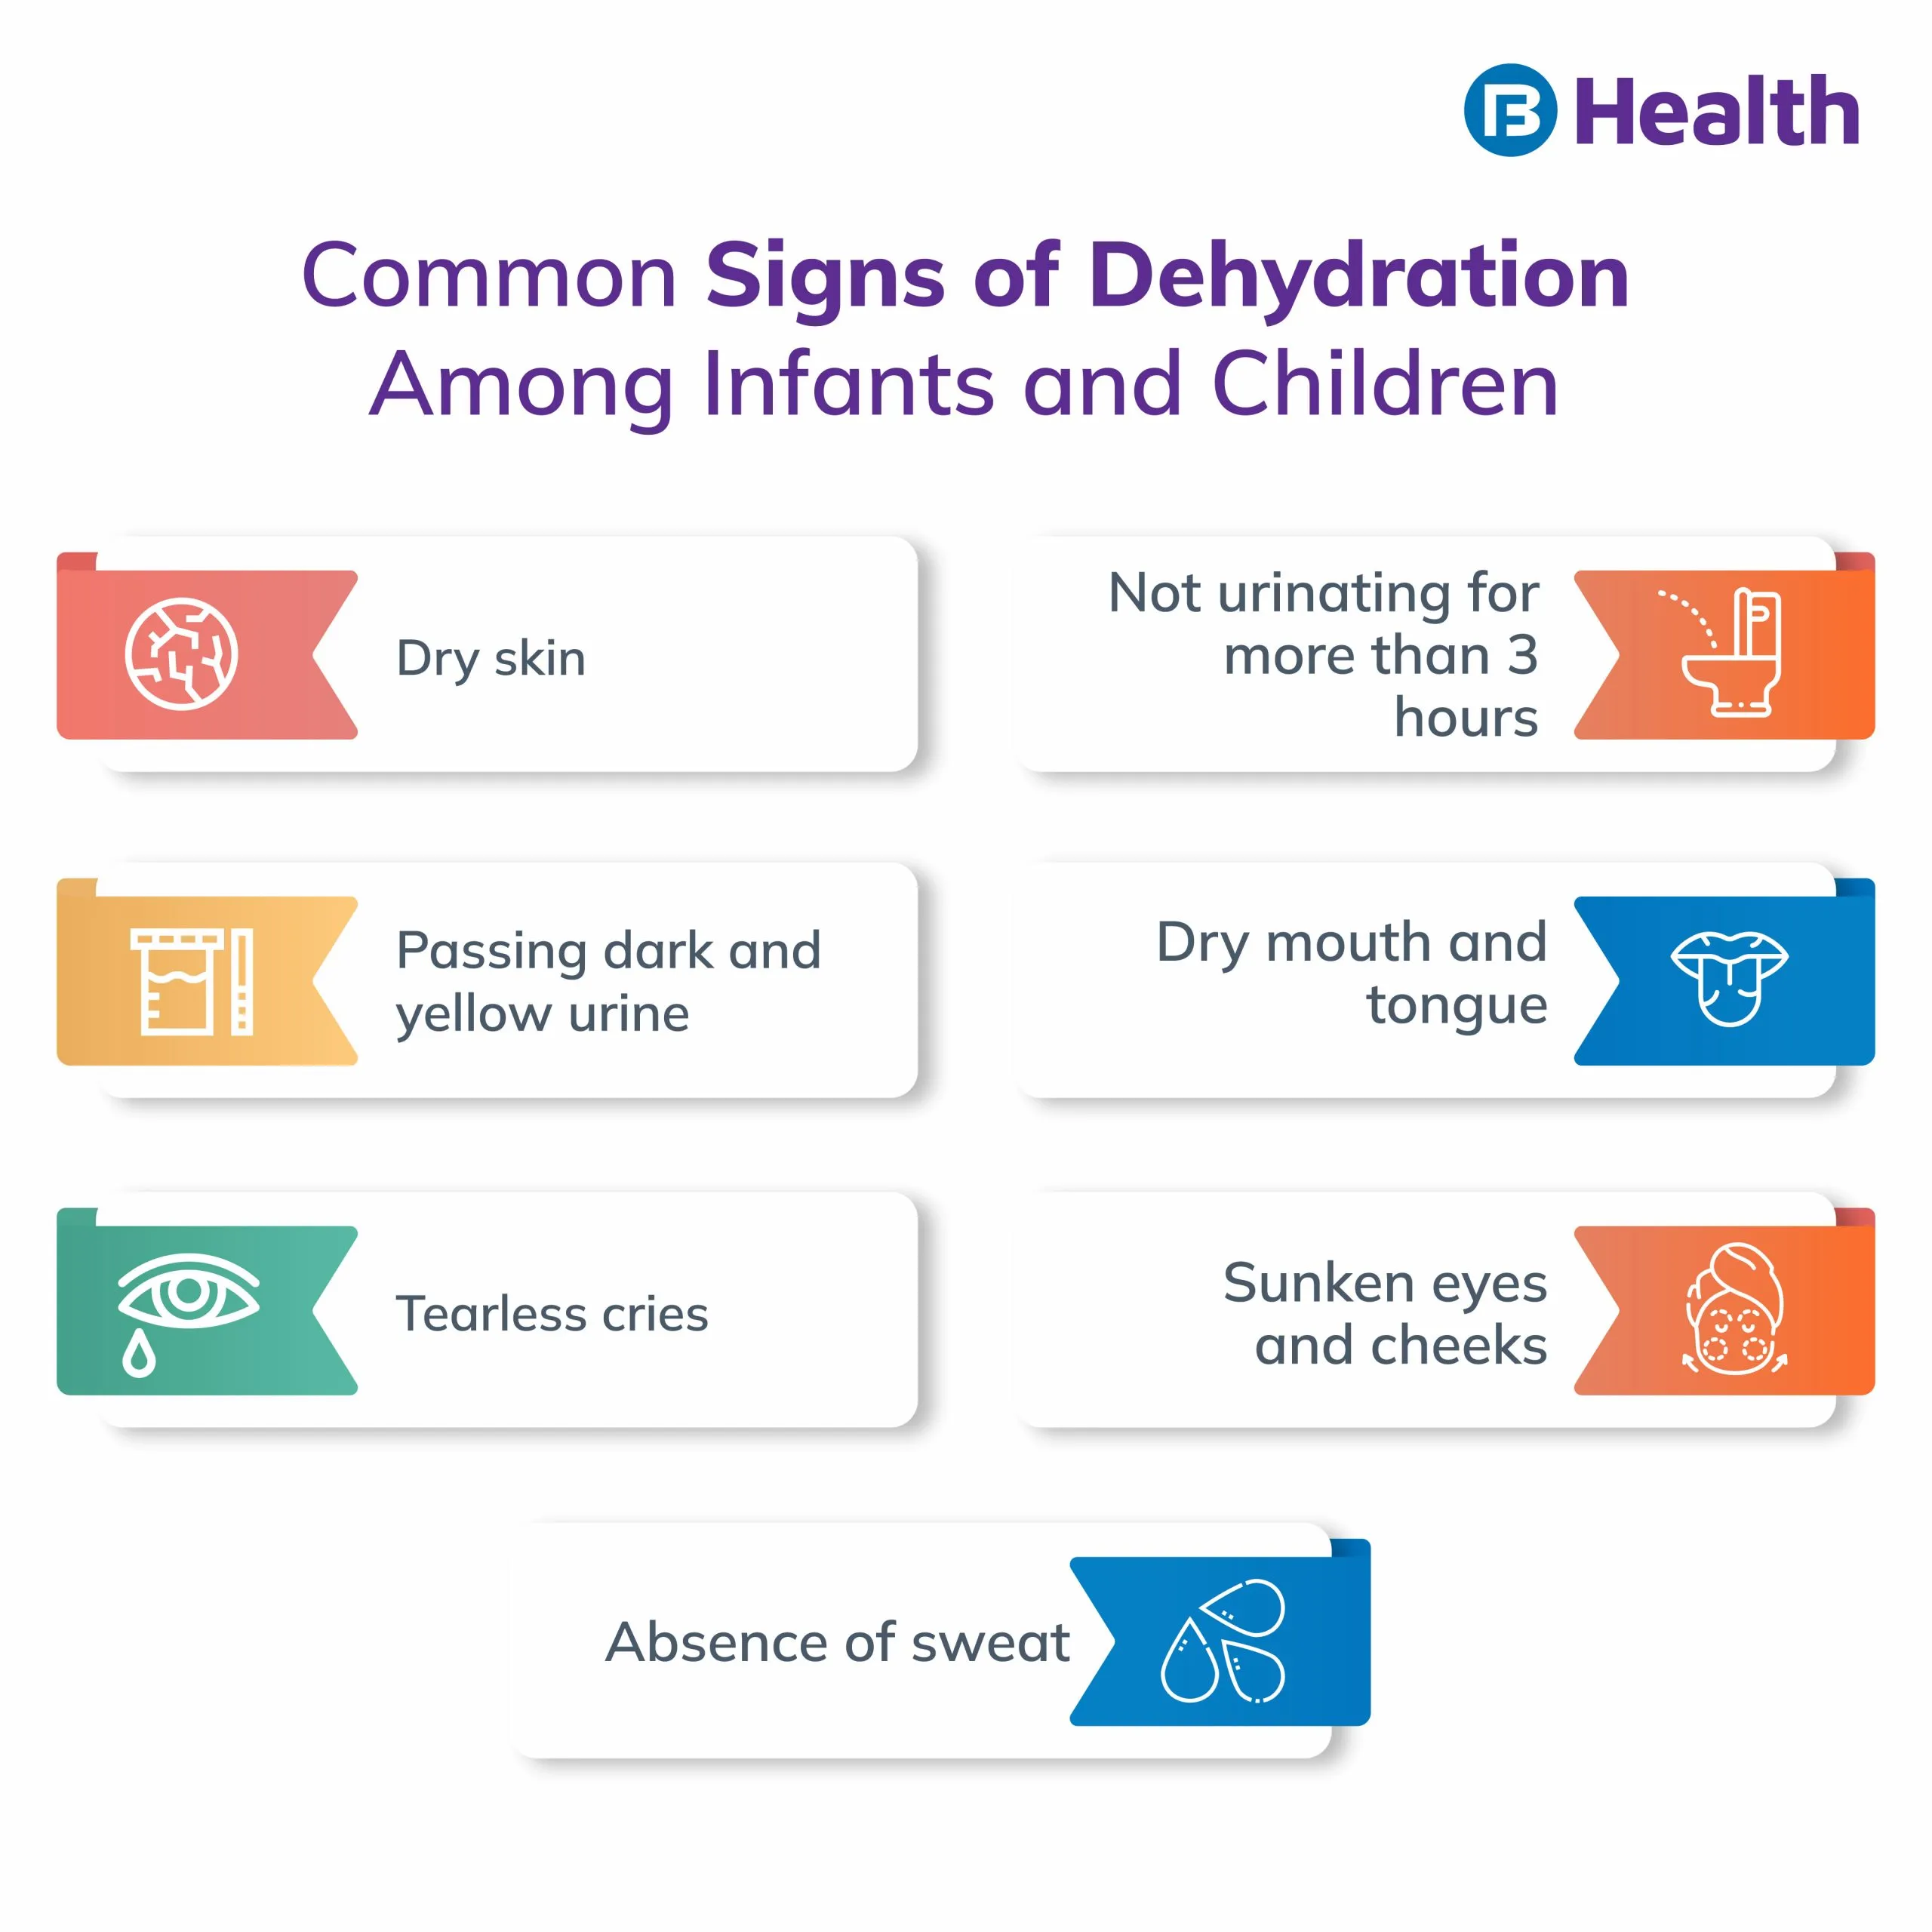 signs of dehydration among infants and children